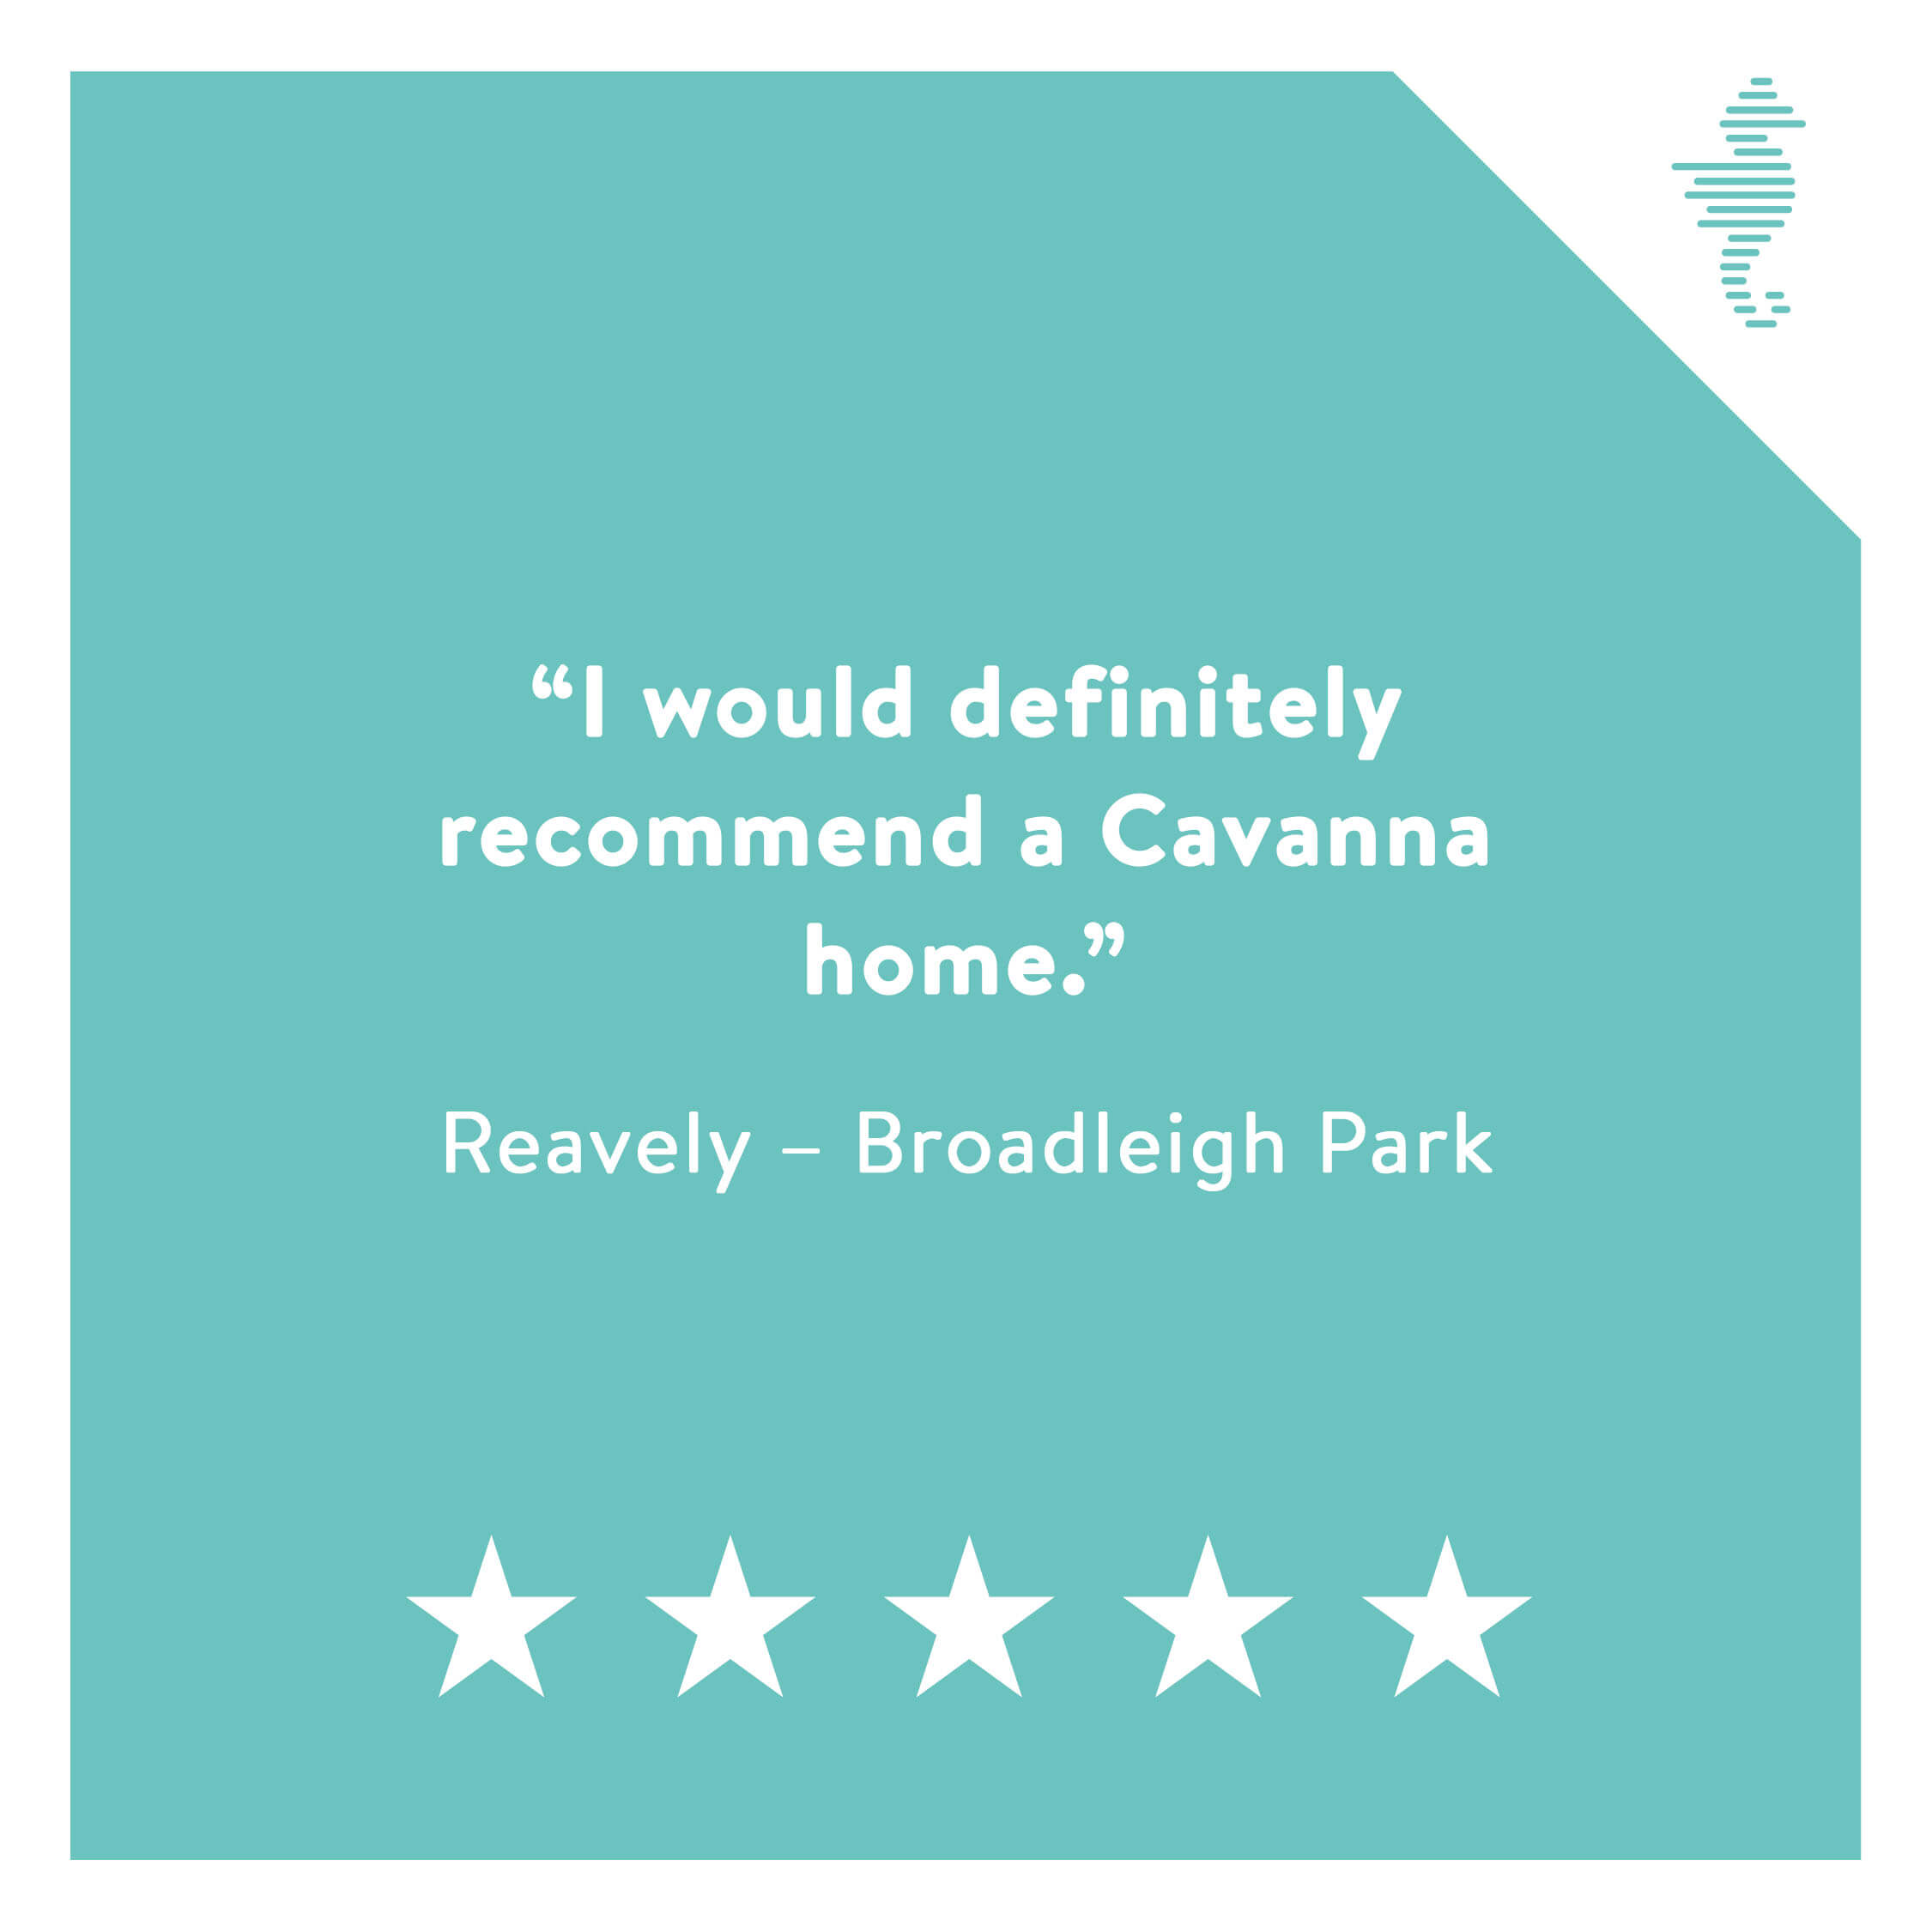 TrustPilot review which reads: "I would definitely recommend a Cavanna home."